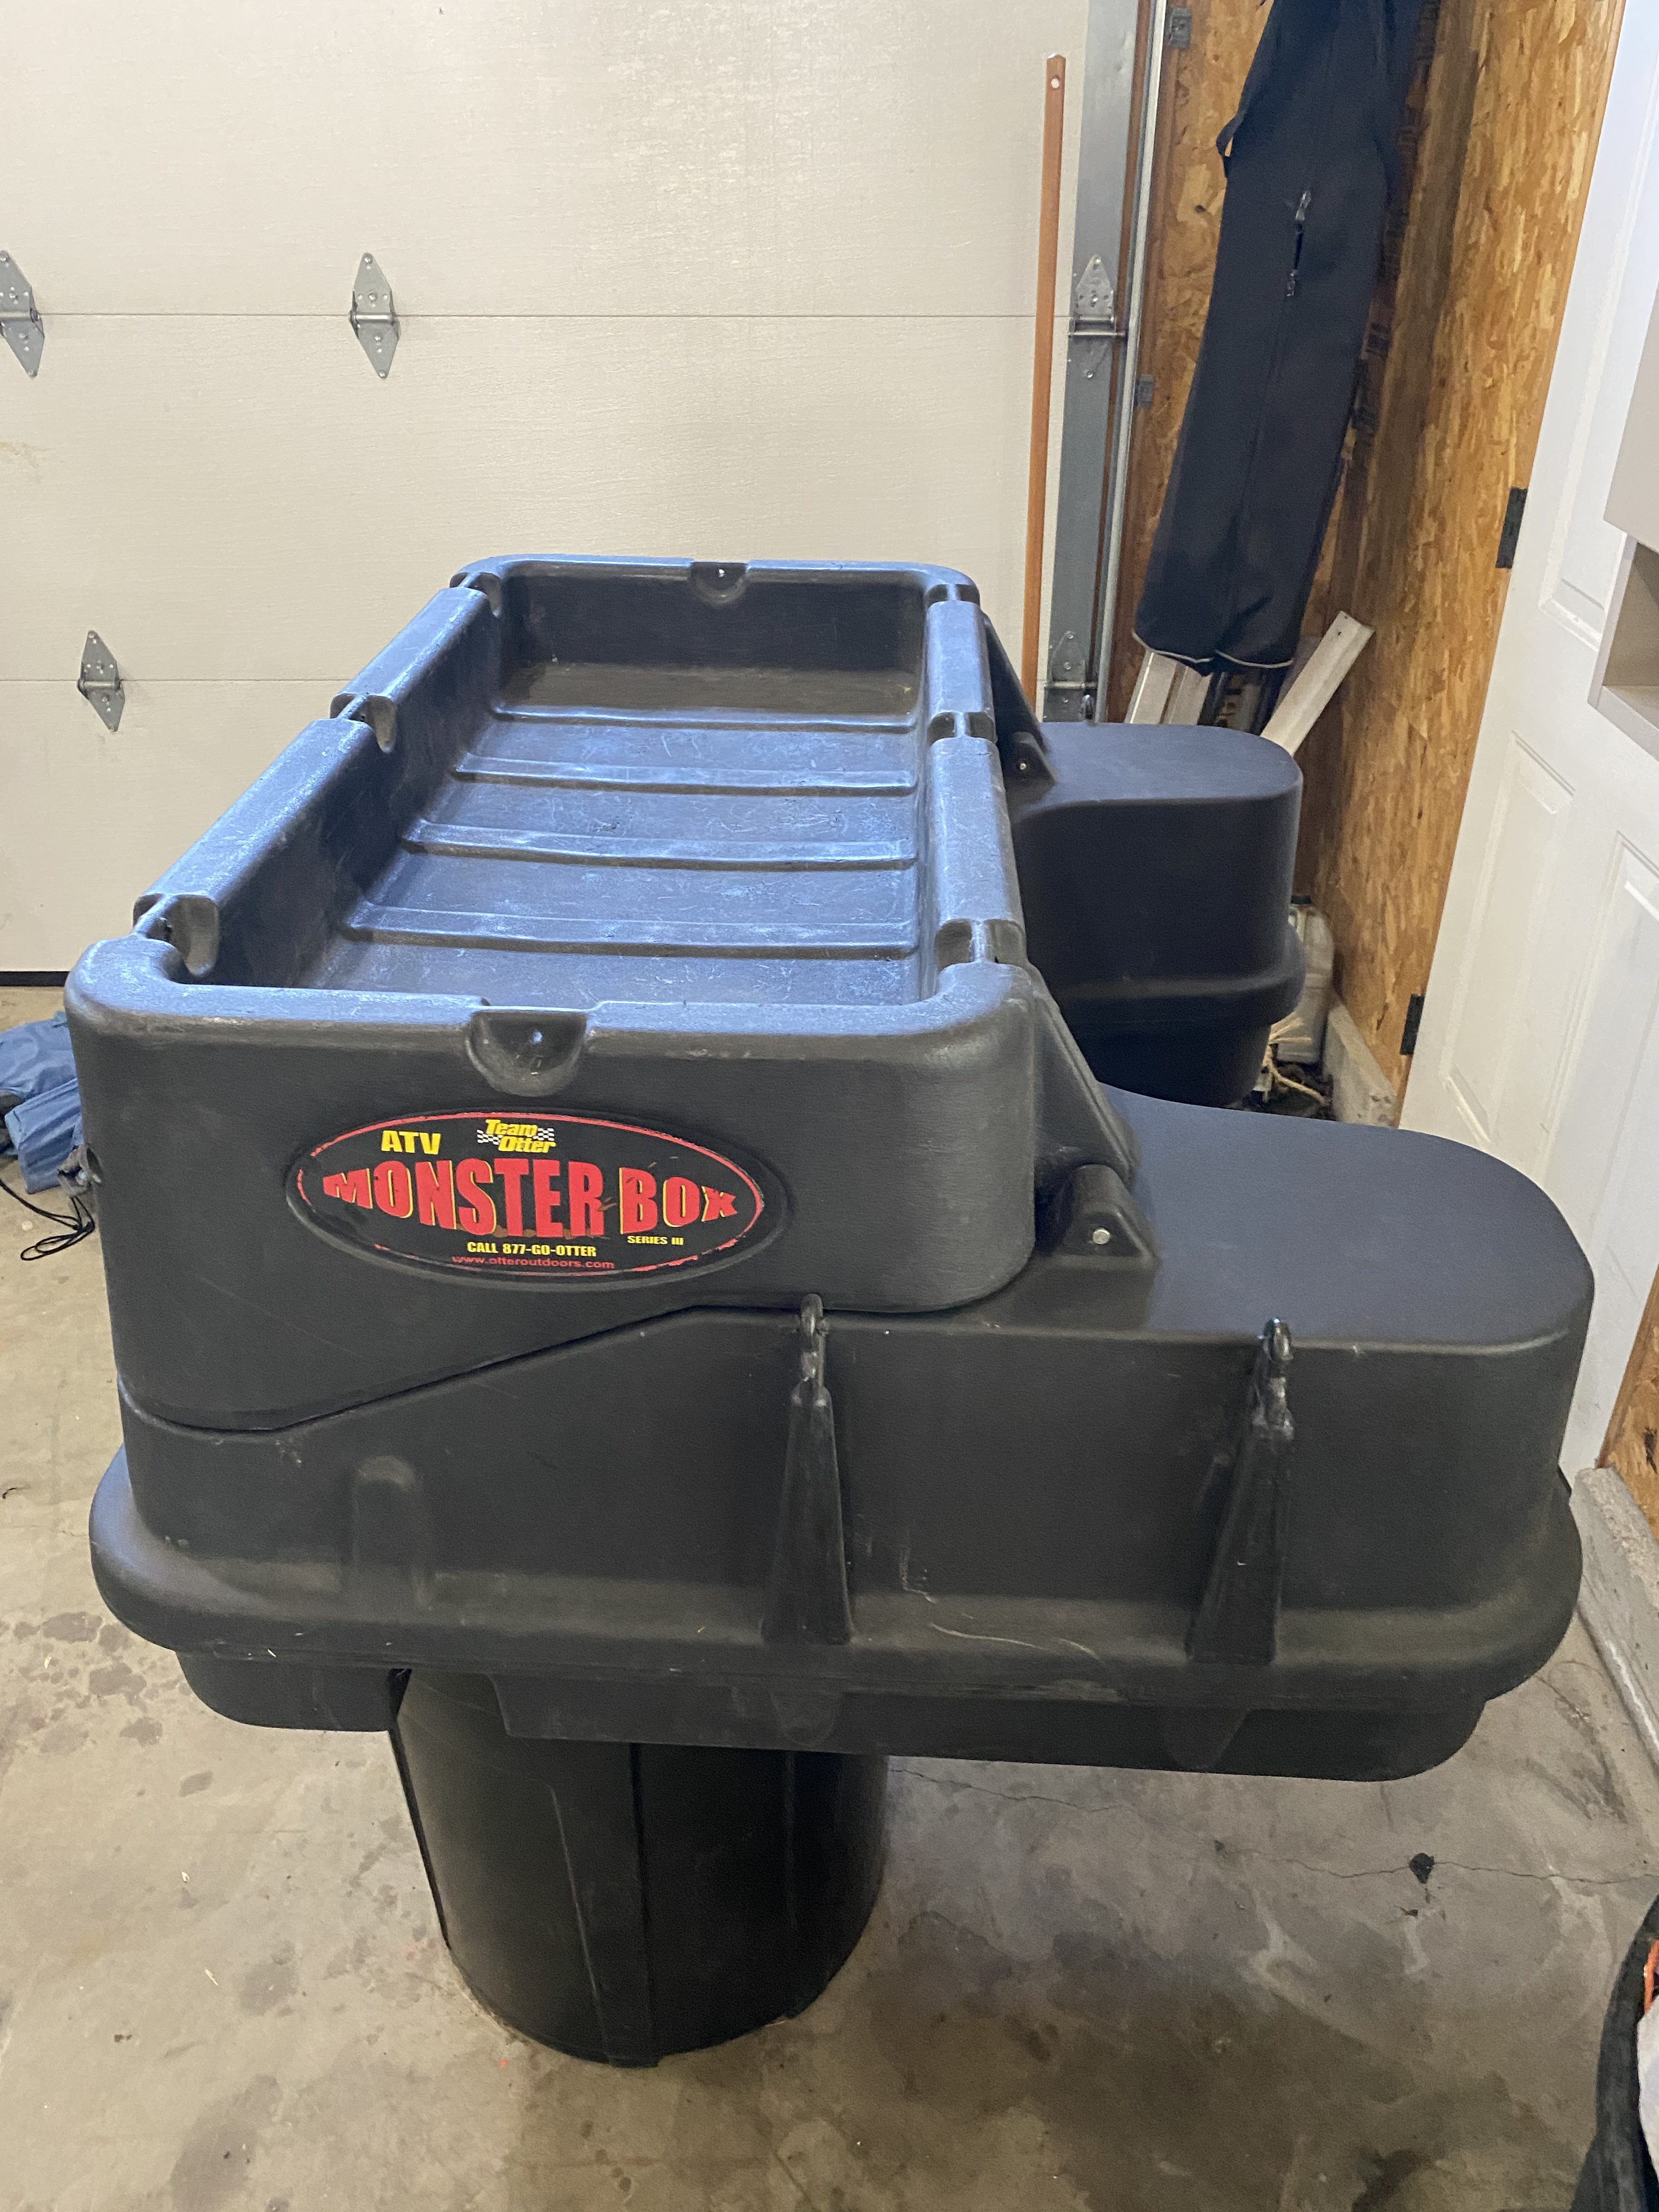 Otter Monster ATV Box - Classified Ads | In-Depth Outdoors